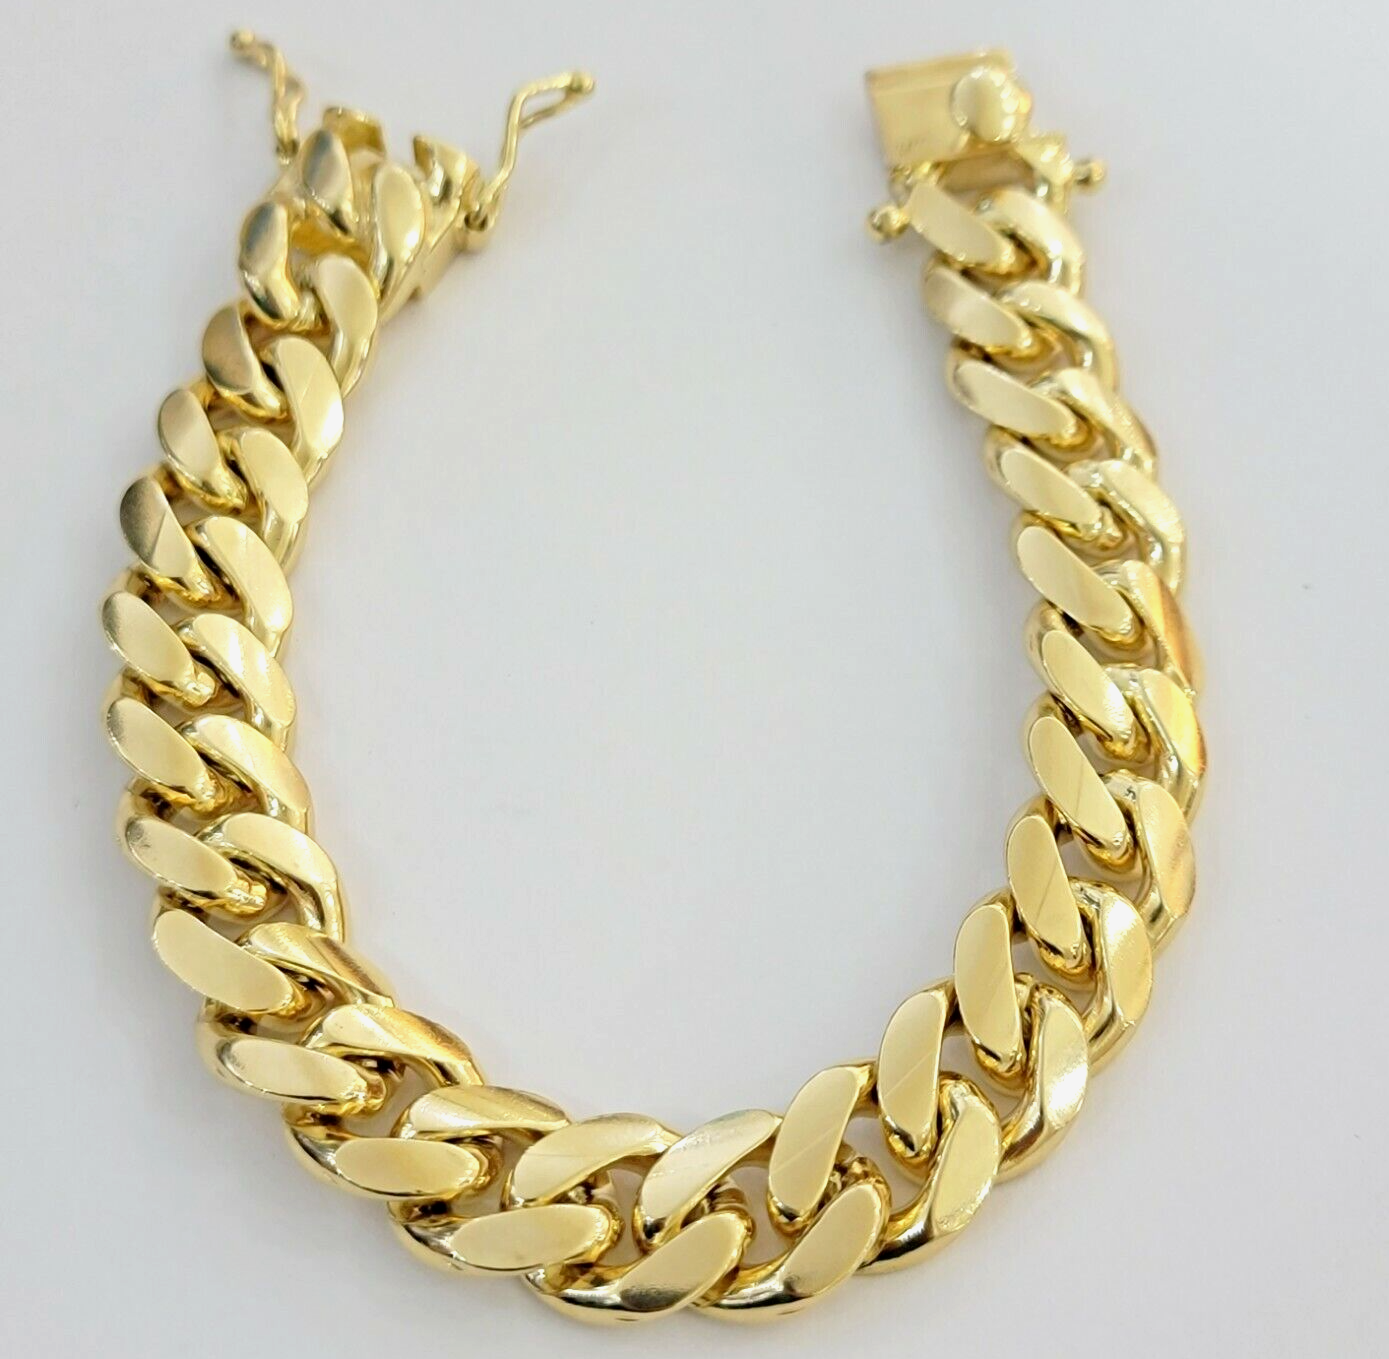 10k Gold Bracelet 8 Inch Miami Cuban Link 13mm Men's Real 10KT Yellow Gold SOLID